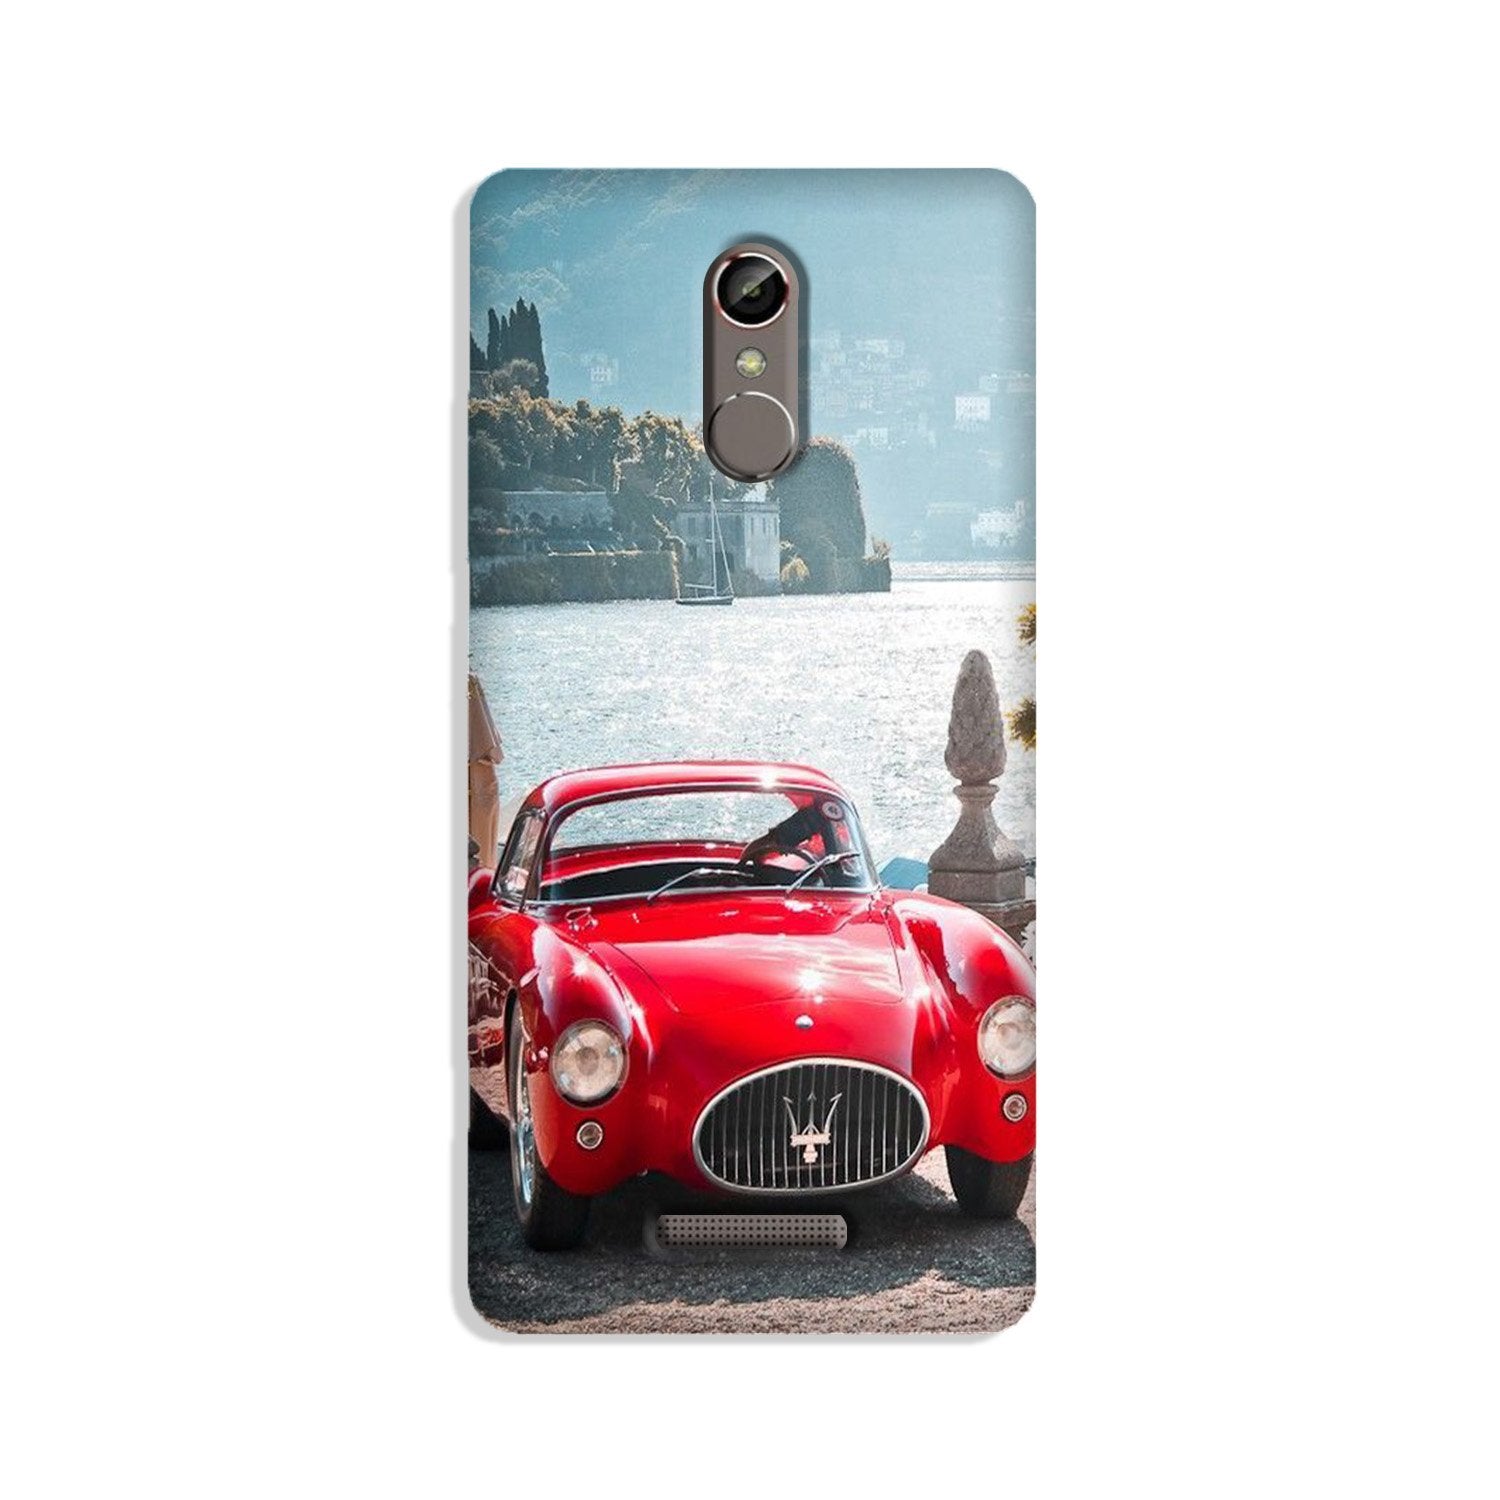 Vintage Car Case for Gionee S6s